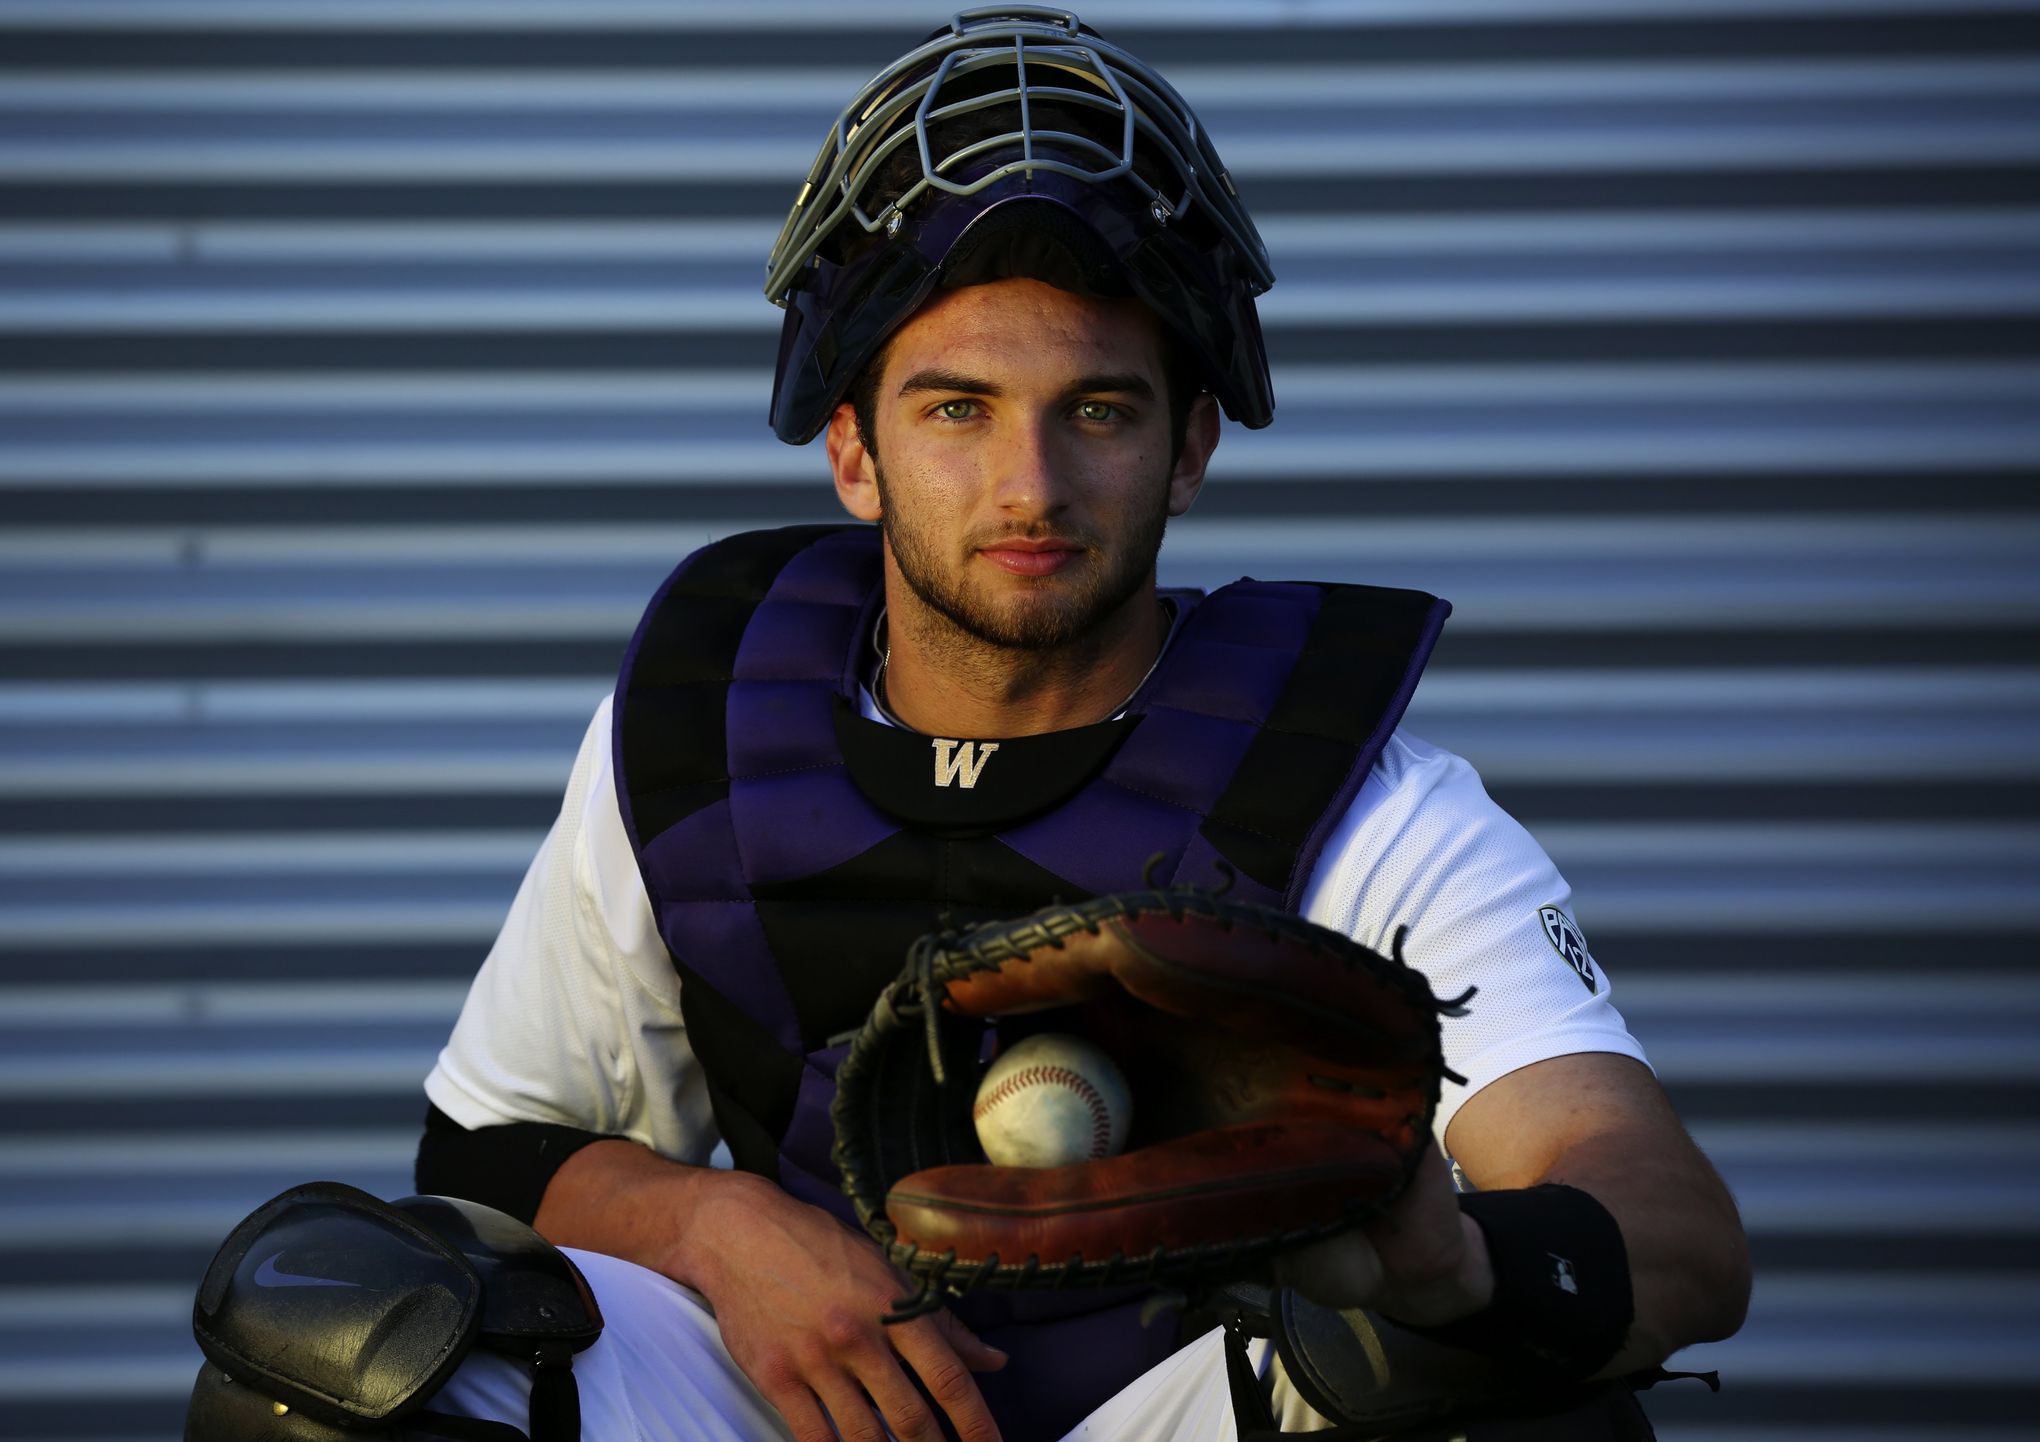 Catcher Joey Morgan thrives as a Husky after almost going to Oregon